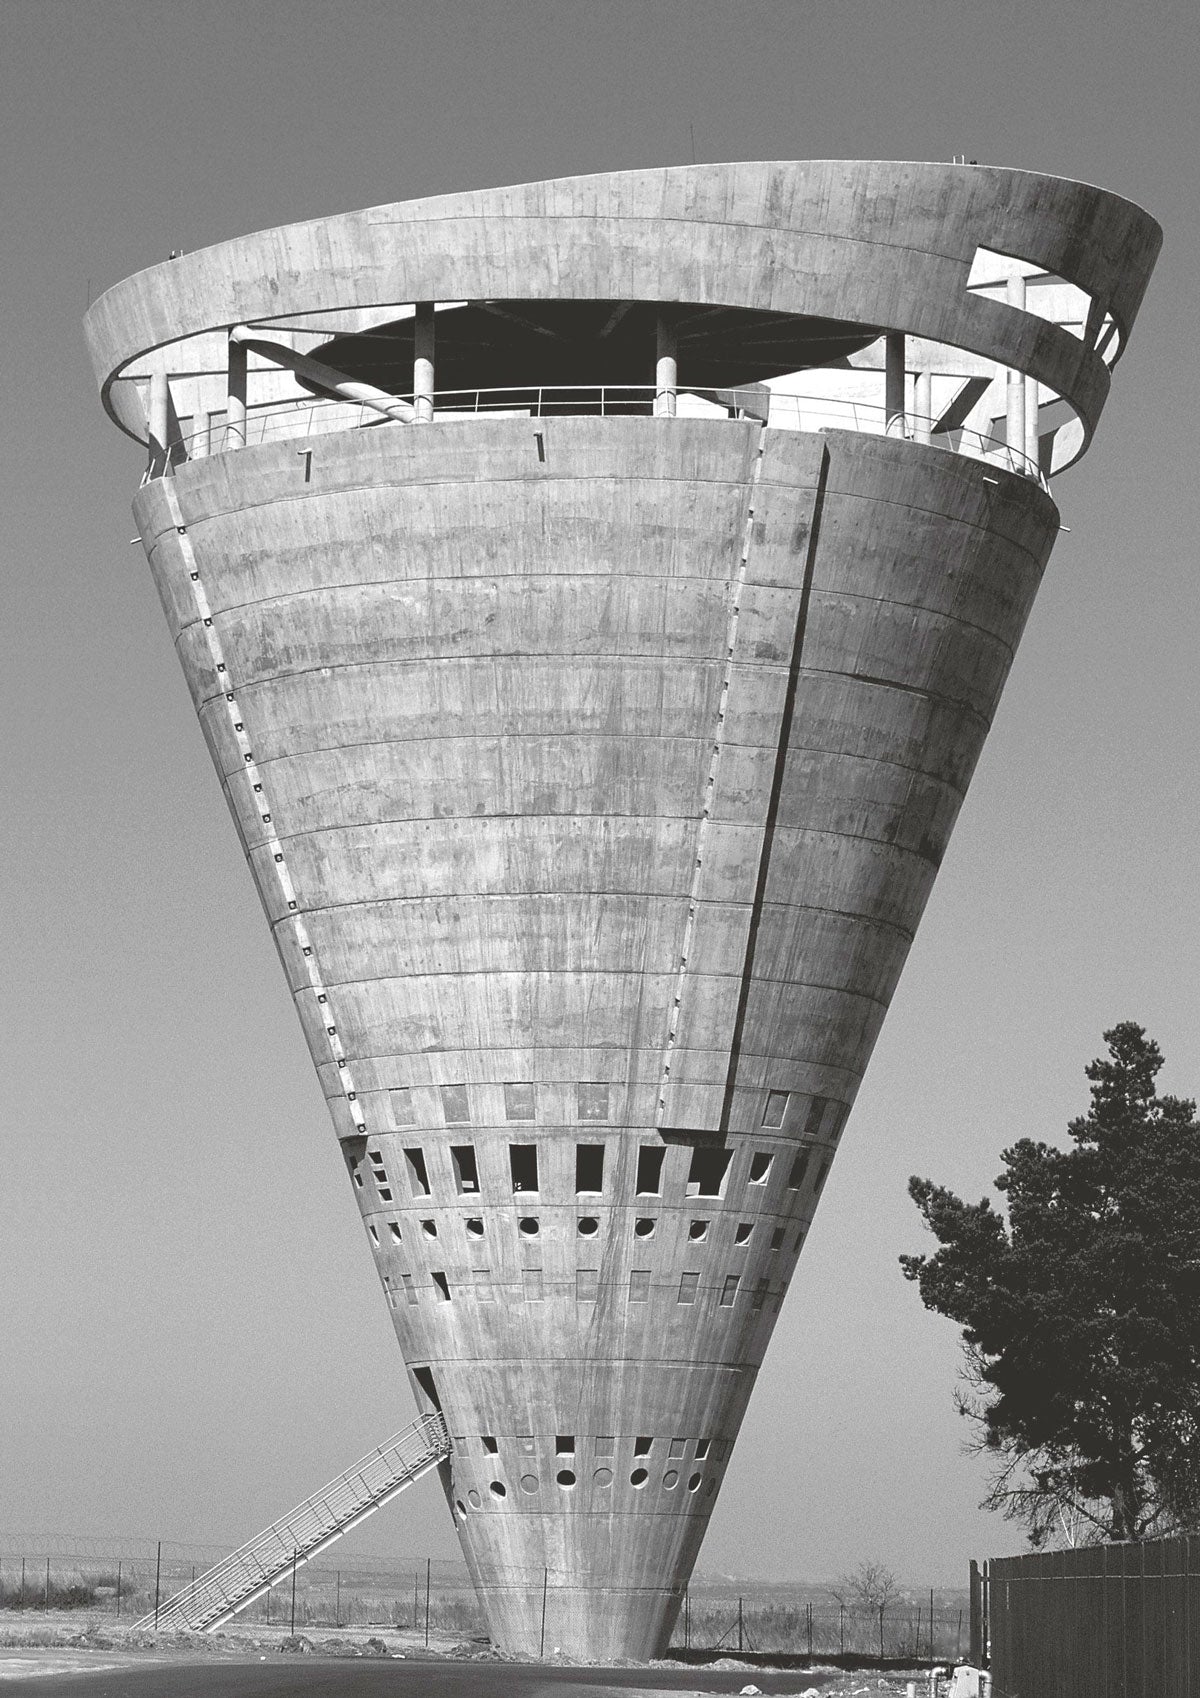 Grand Central Water Tower, GAPP Architects & Urban Designers, 1996 (Midrand, South Africa)